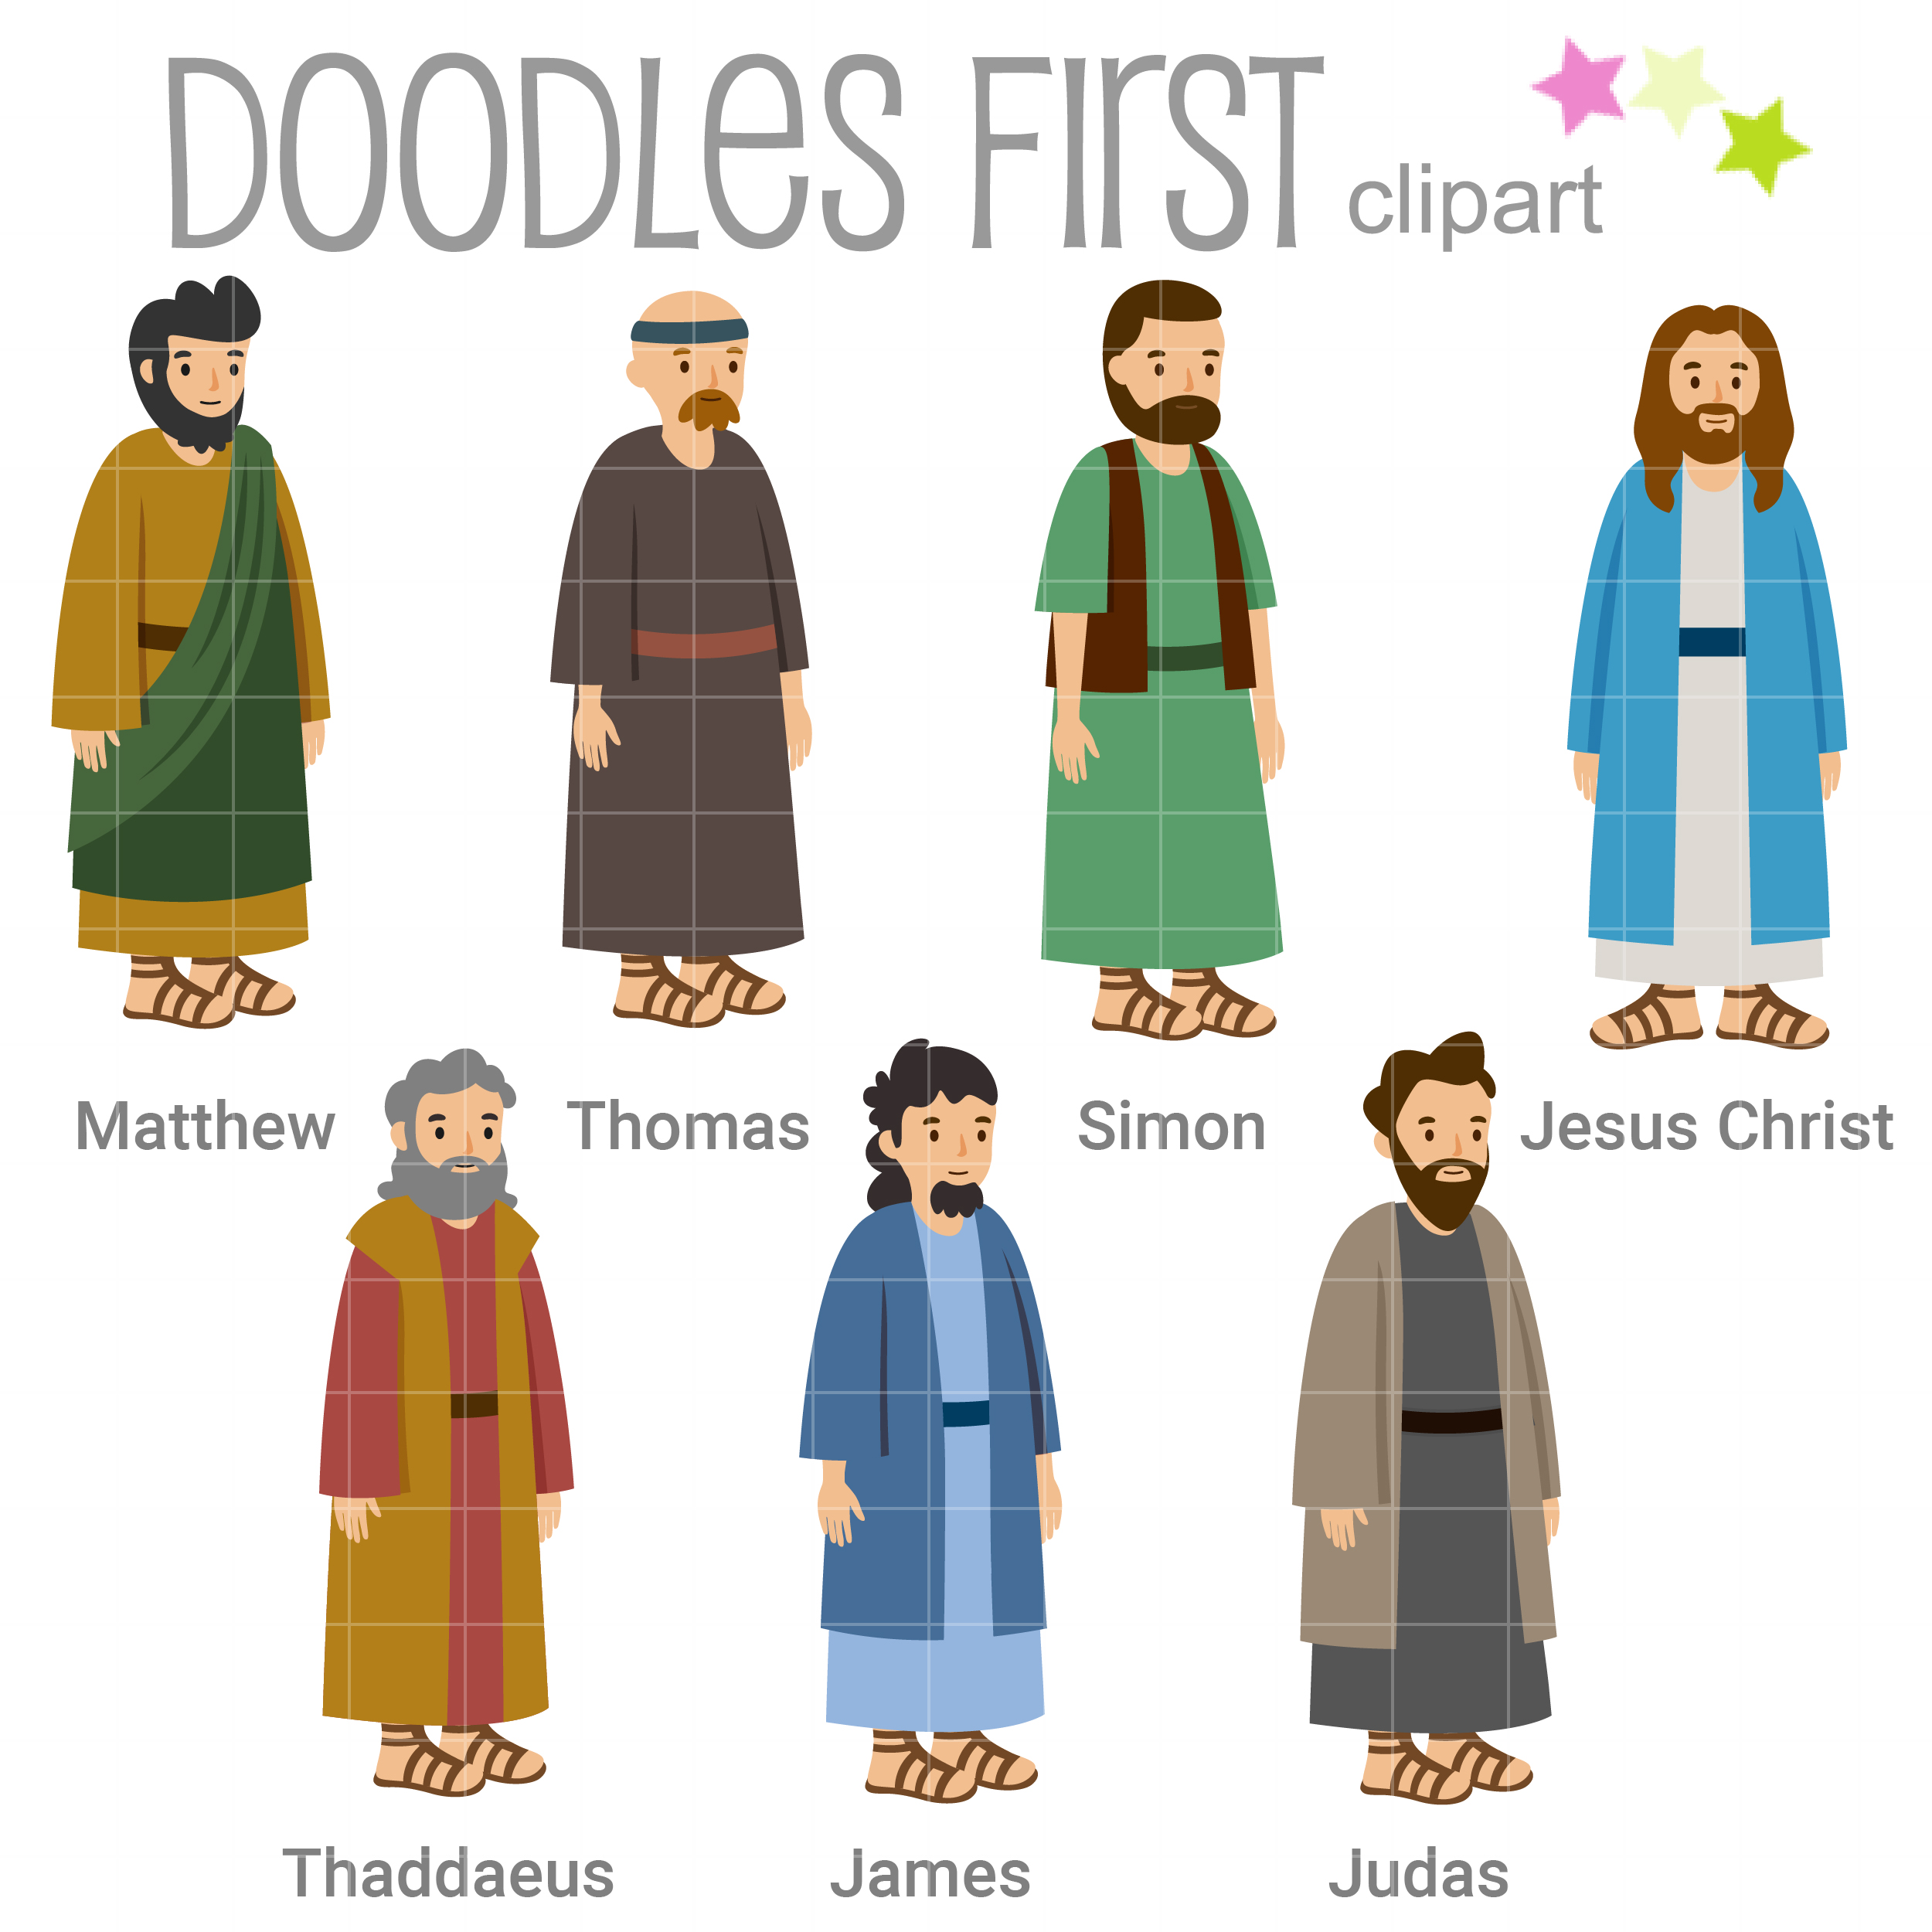 Jesus Christ and 6 of the 12 Disciples Clip Art Set.